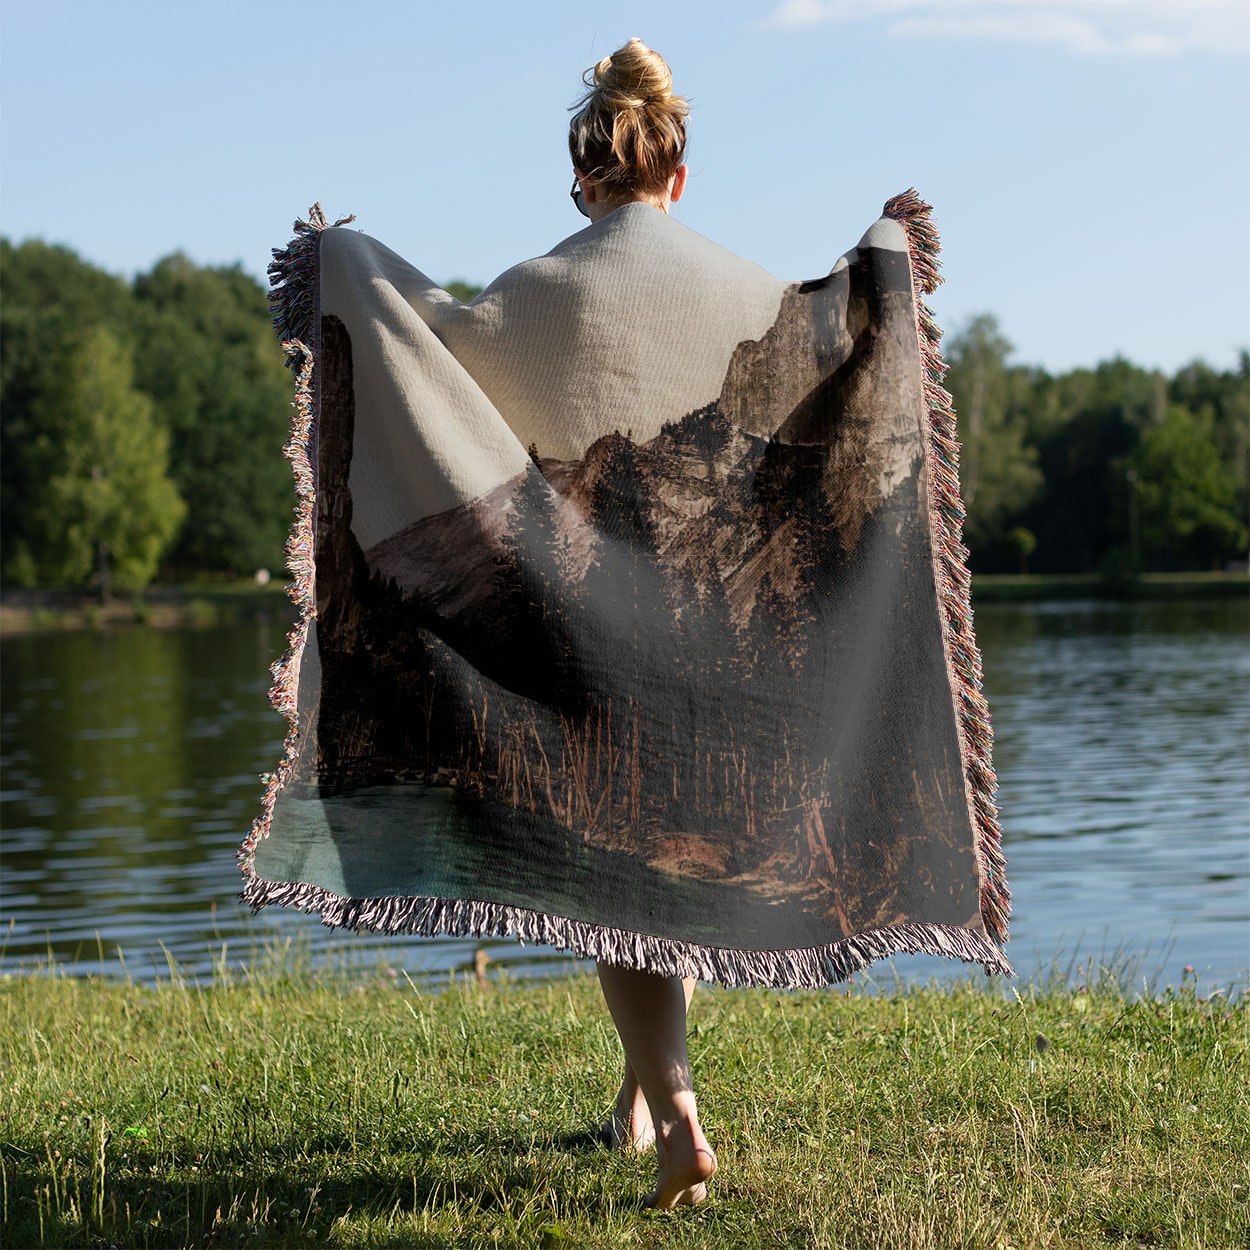 Yosemite National Park Woven Blanket Held on a Woman's Back Outside